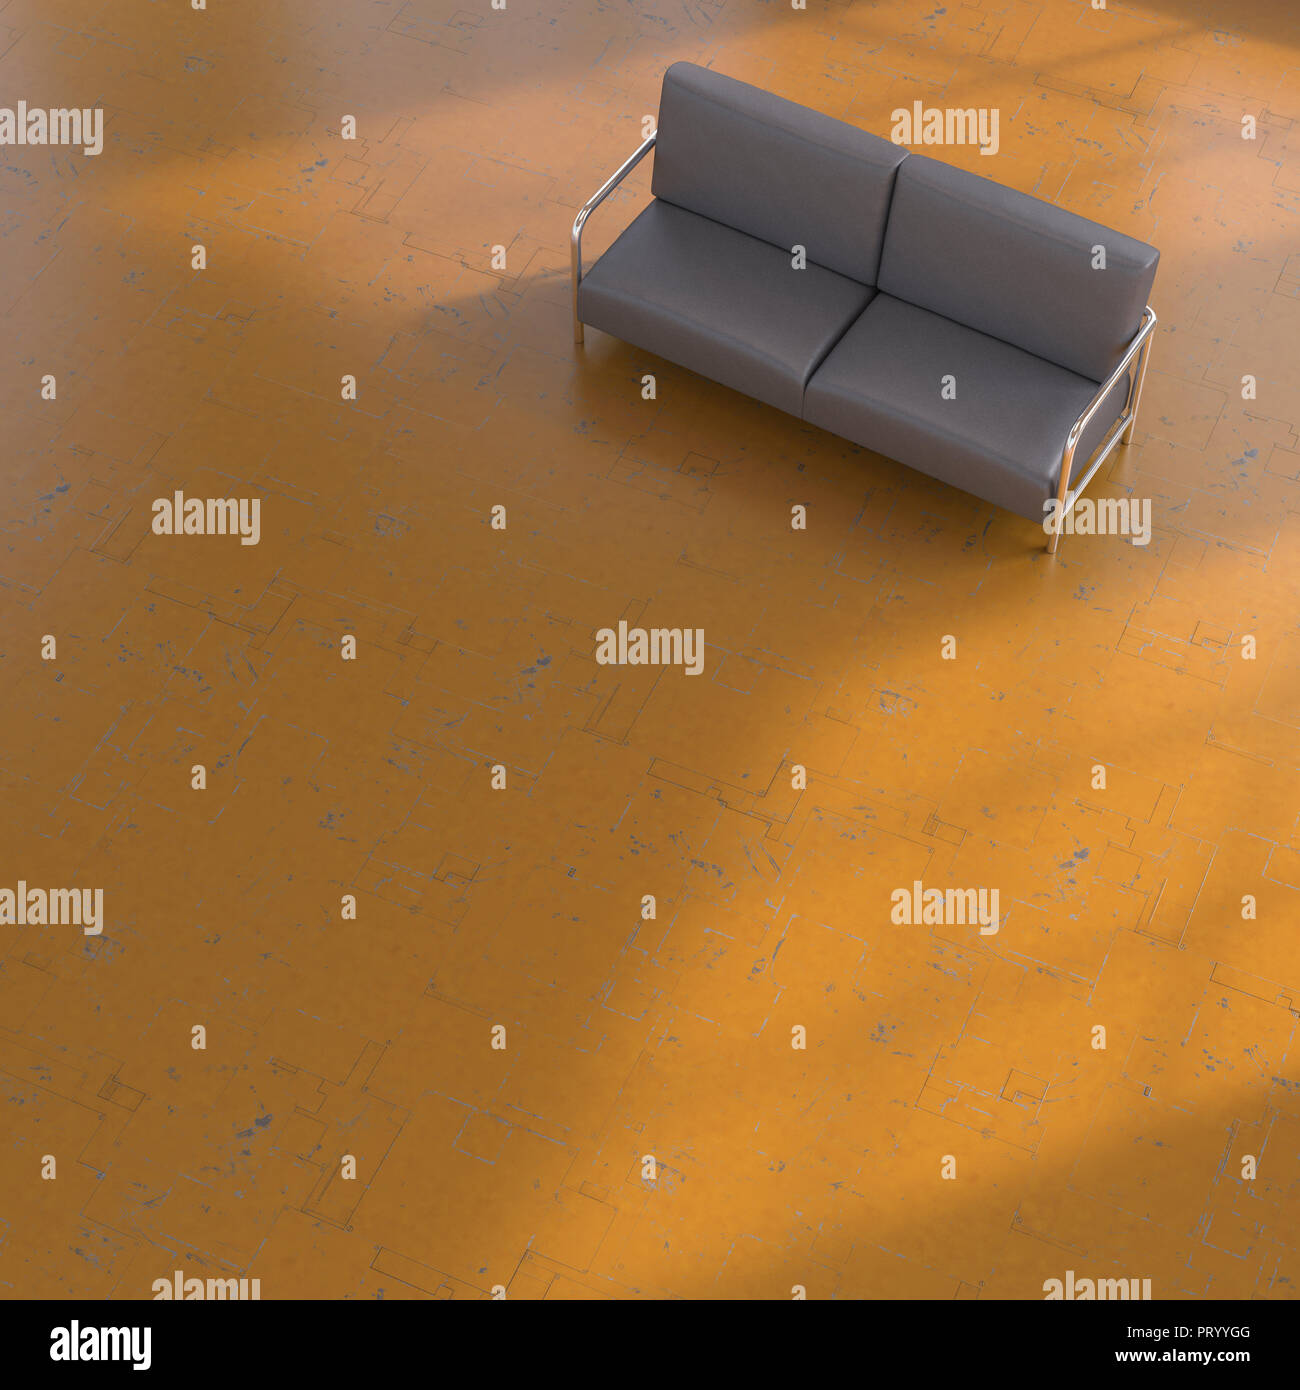 3D rendering, Couch on patterned floor Stock Photo